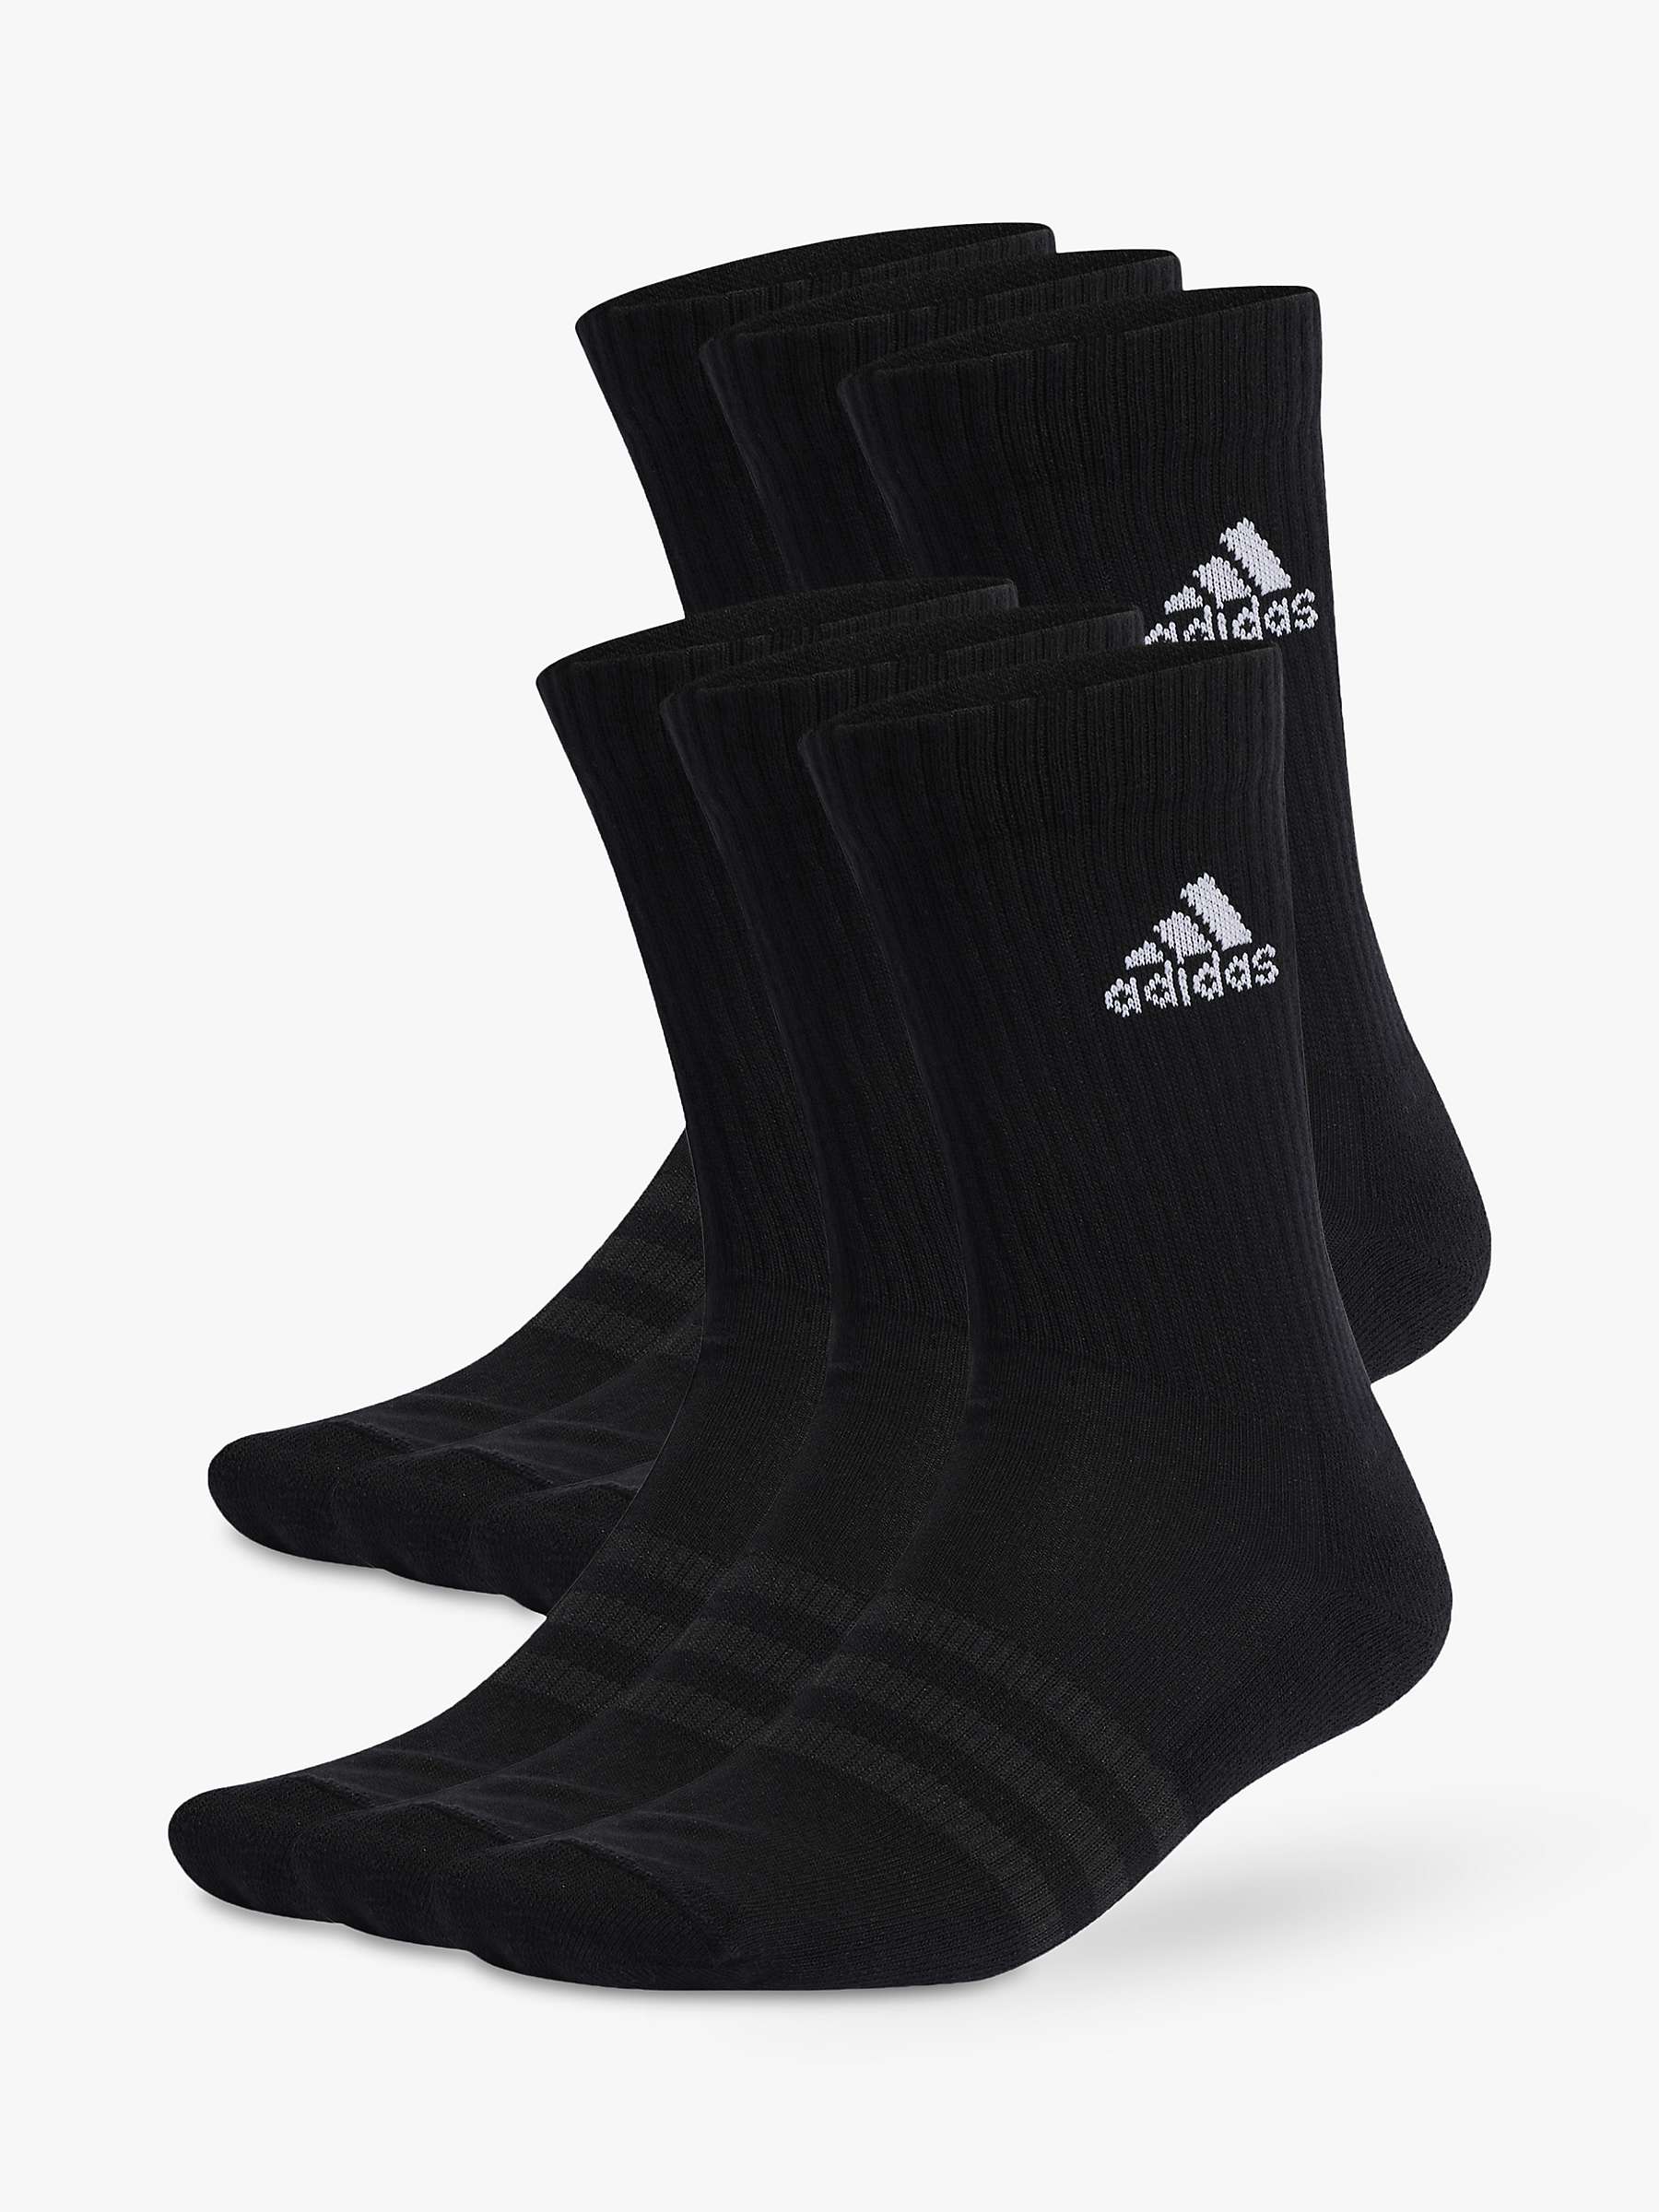 Buy adidas Cushioned Crew Socks, Pack of 6 Online at johnlewis.com